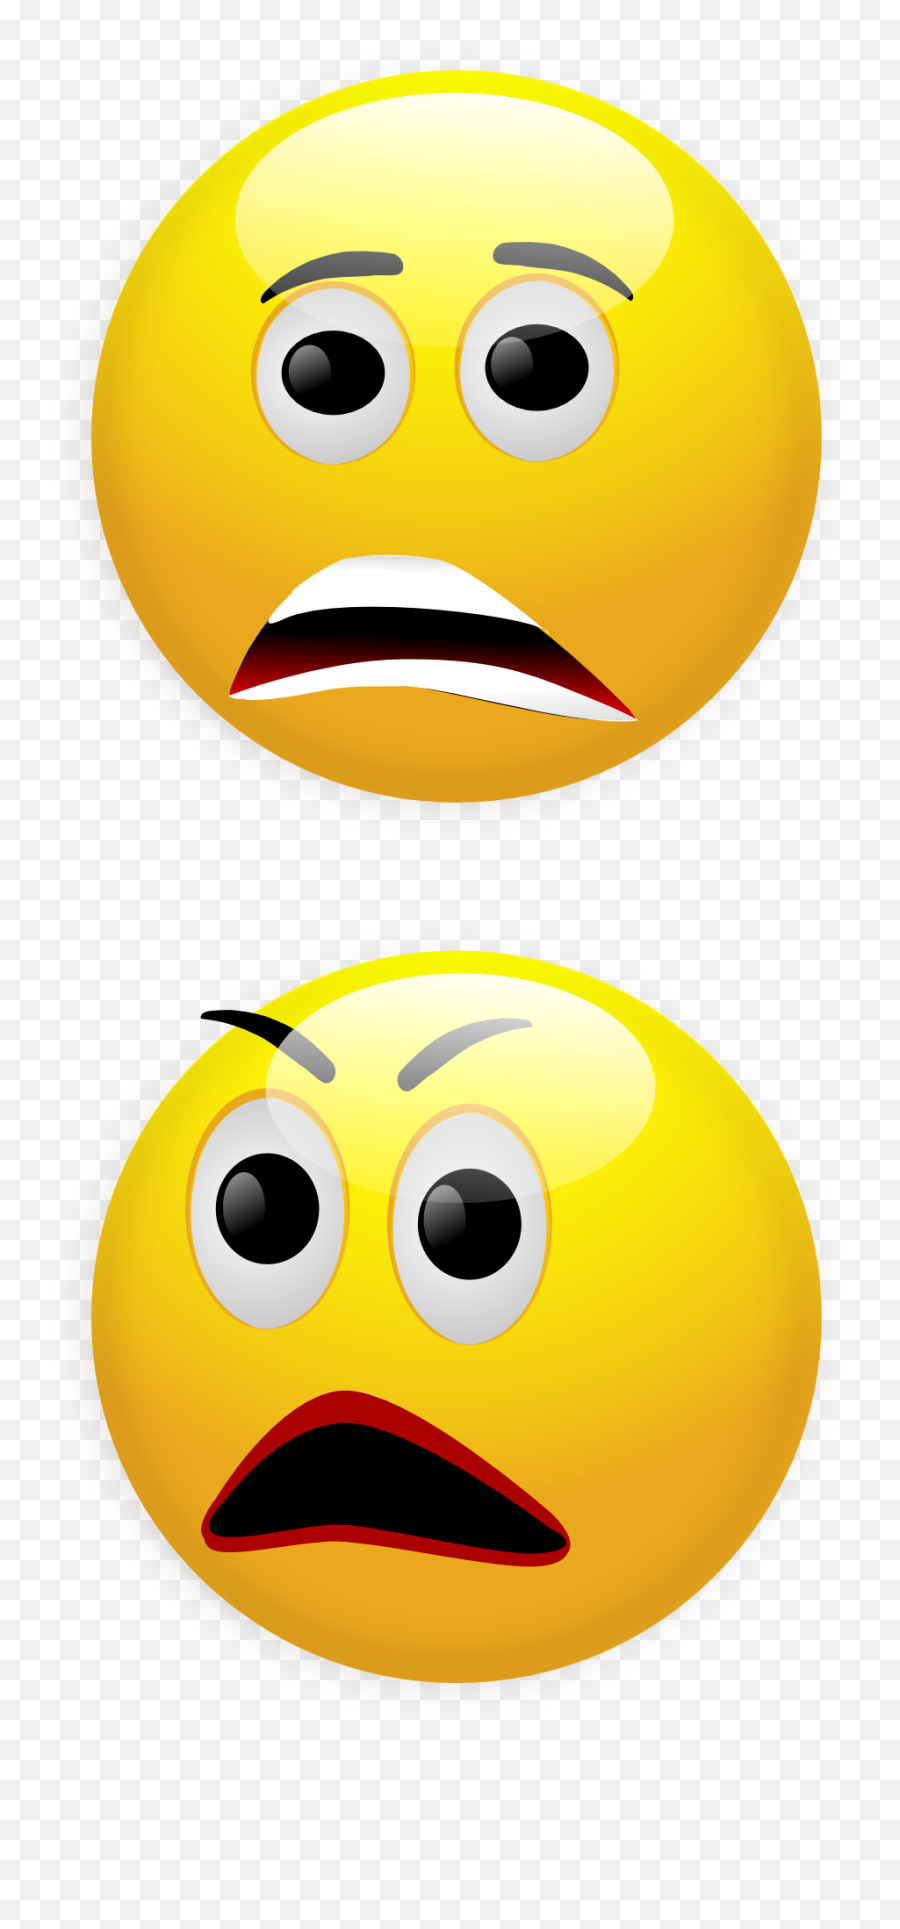 Smiley Fear Anger Angry Shocked Png Picpng - Endieli Yüz Ifadesi Emoji,Angry Emoticon